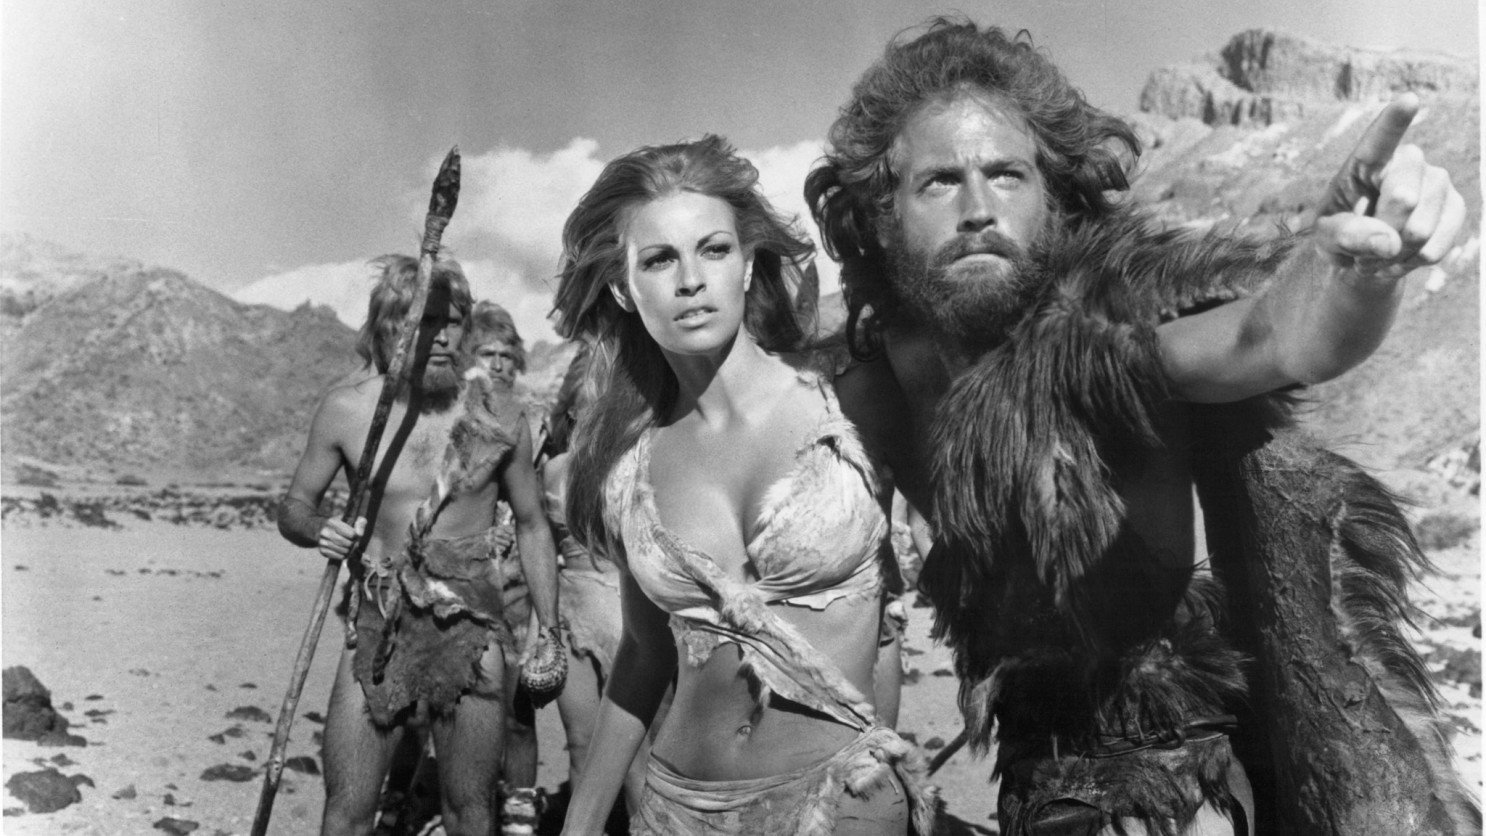 Classic Hollywood: Raquel Welch reflects on her life as a sex symbol and movie star - Los Angeles Times